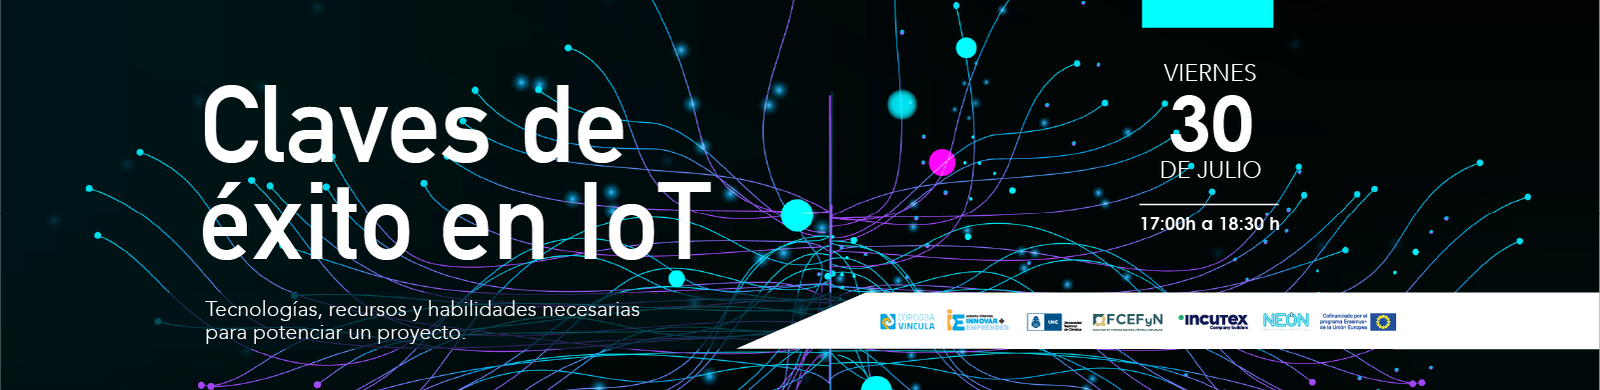 Banner Claves_exito_IoT